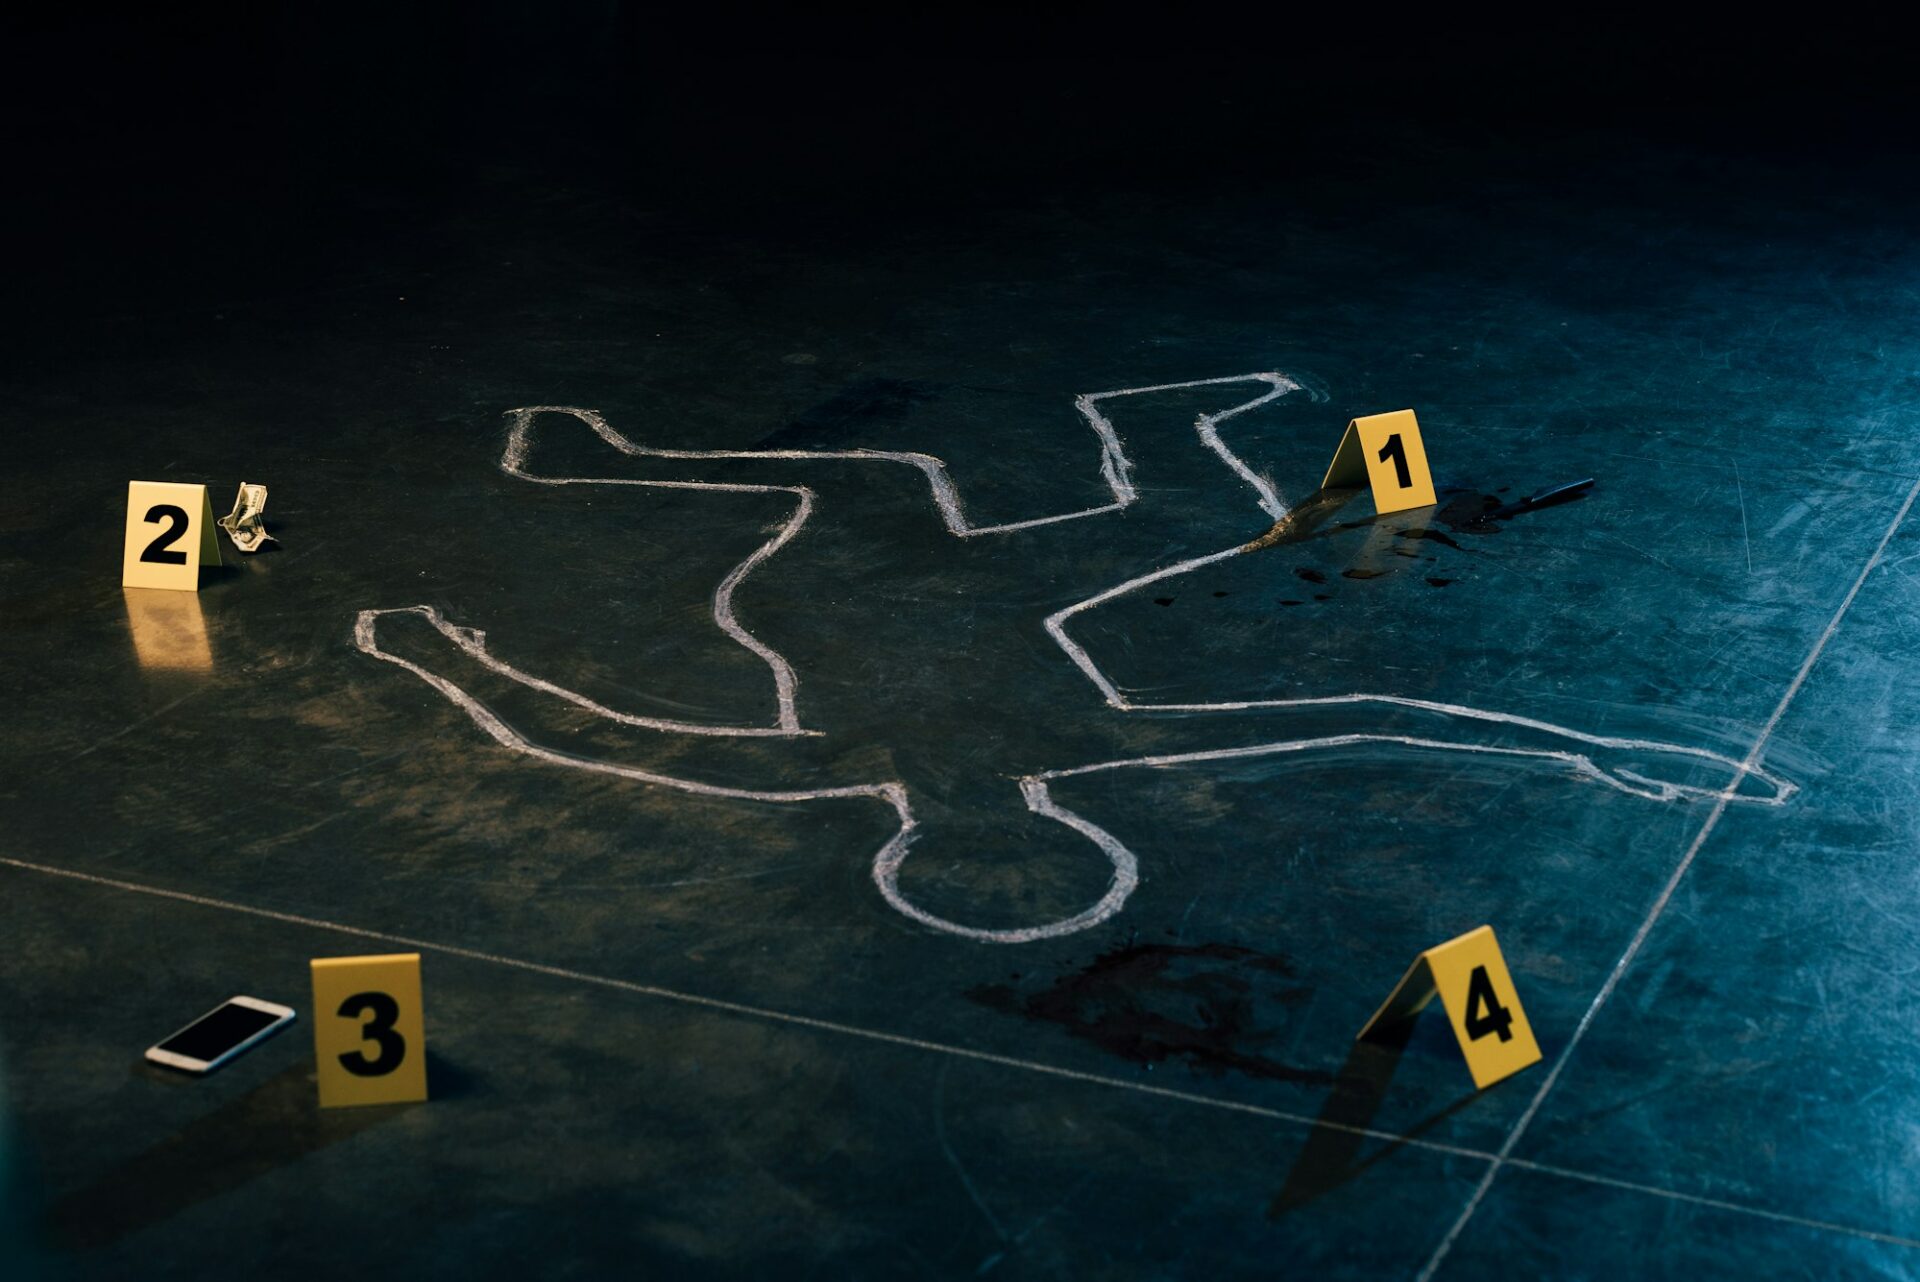 chalk outline and evidence markers at crime scene